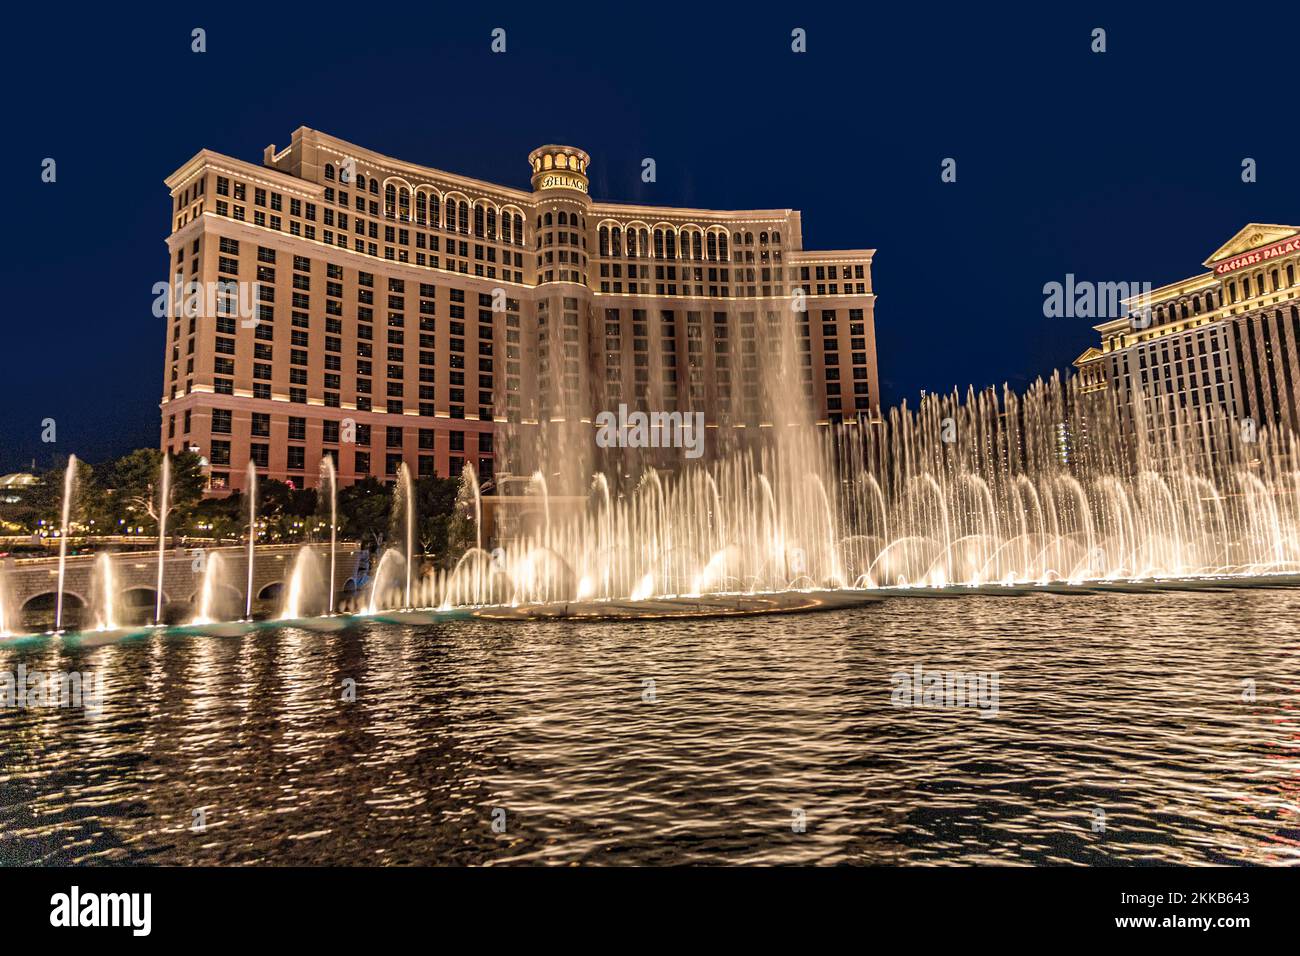 Las Vegas, USA - July 17, 2008:  Las Vegas Bellagio Hotel Casino, featured with its world famous fountain show, at night with fountains  in Las Vegas, Stock Photo